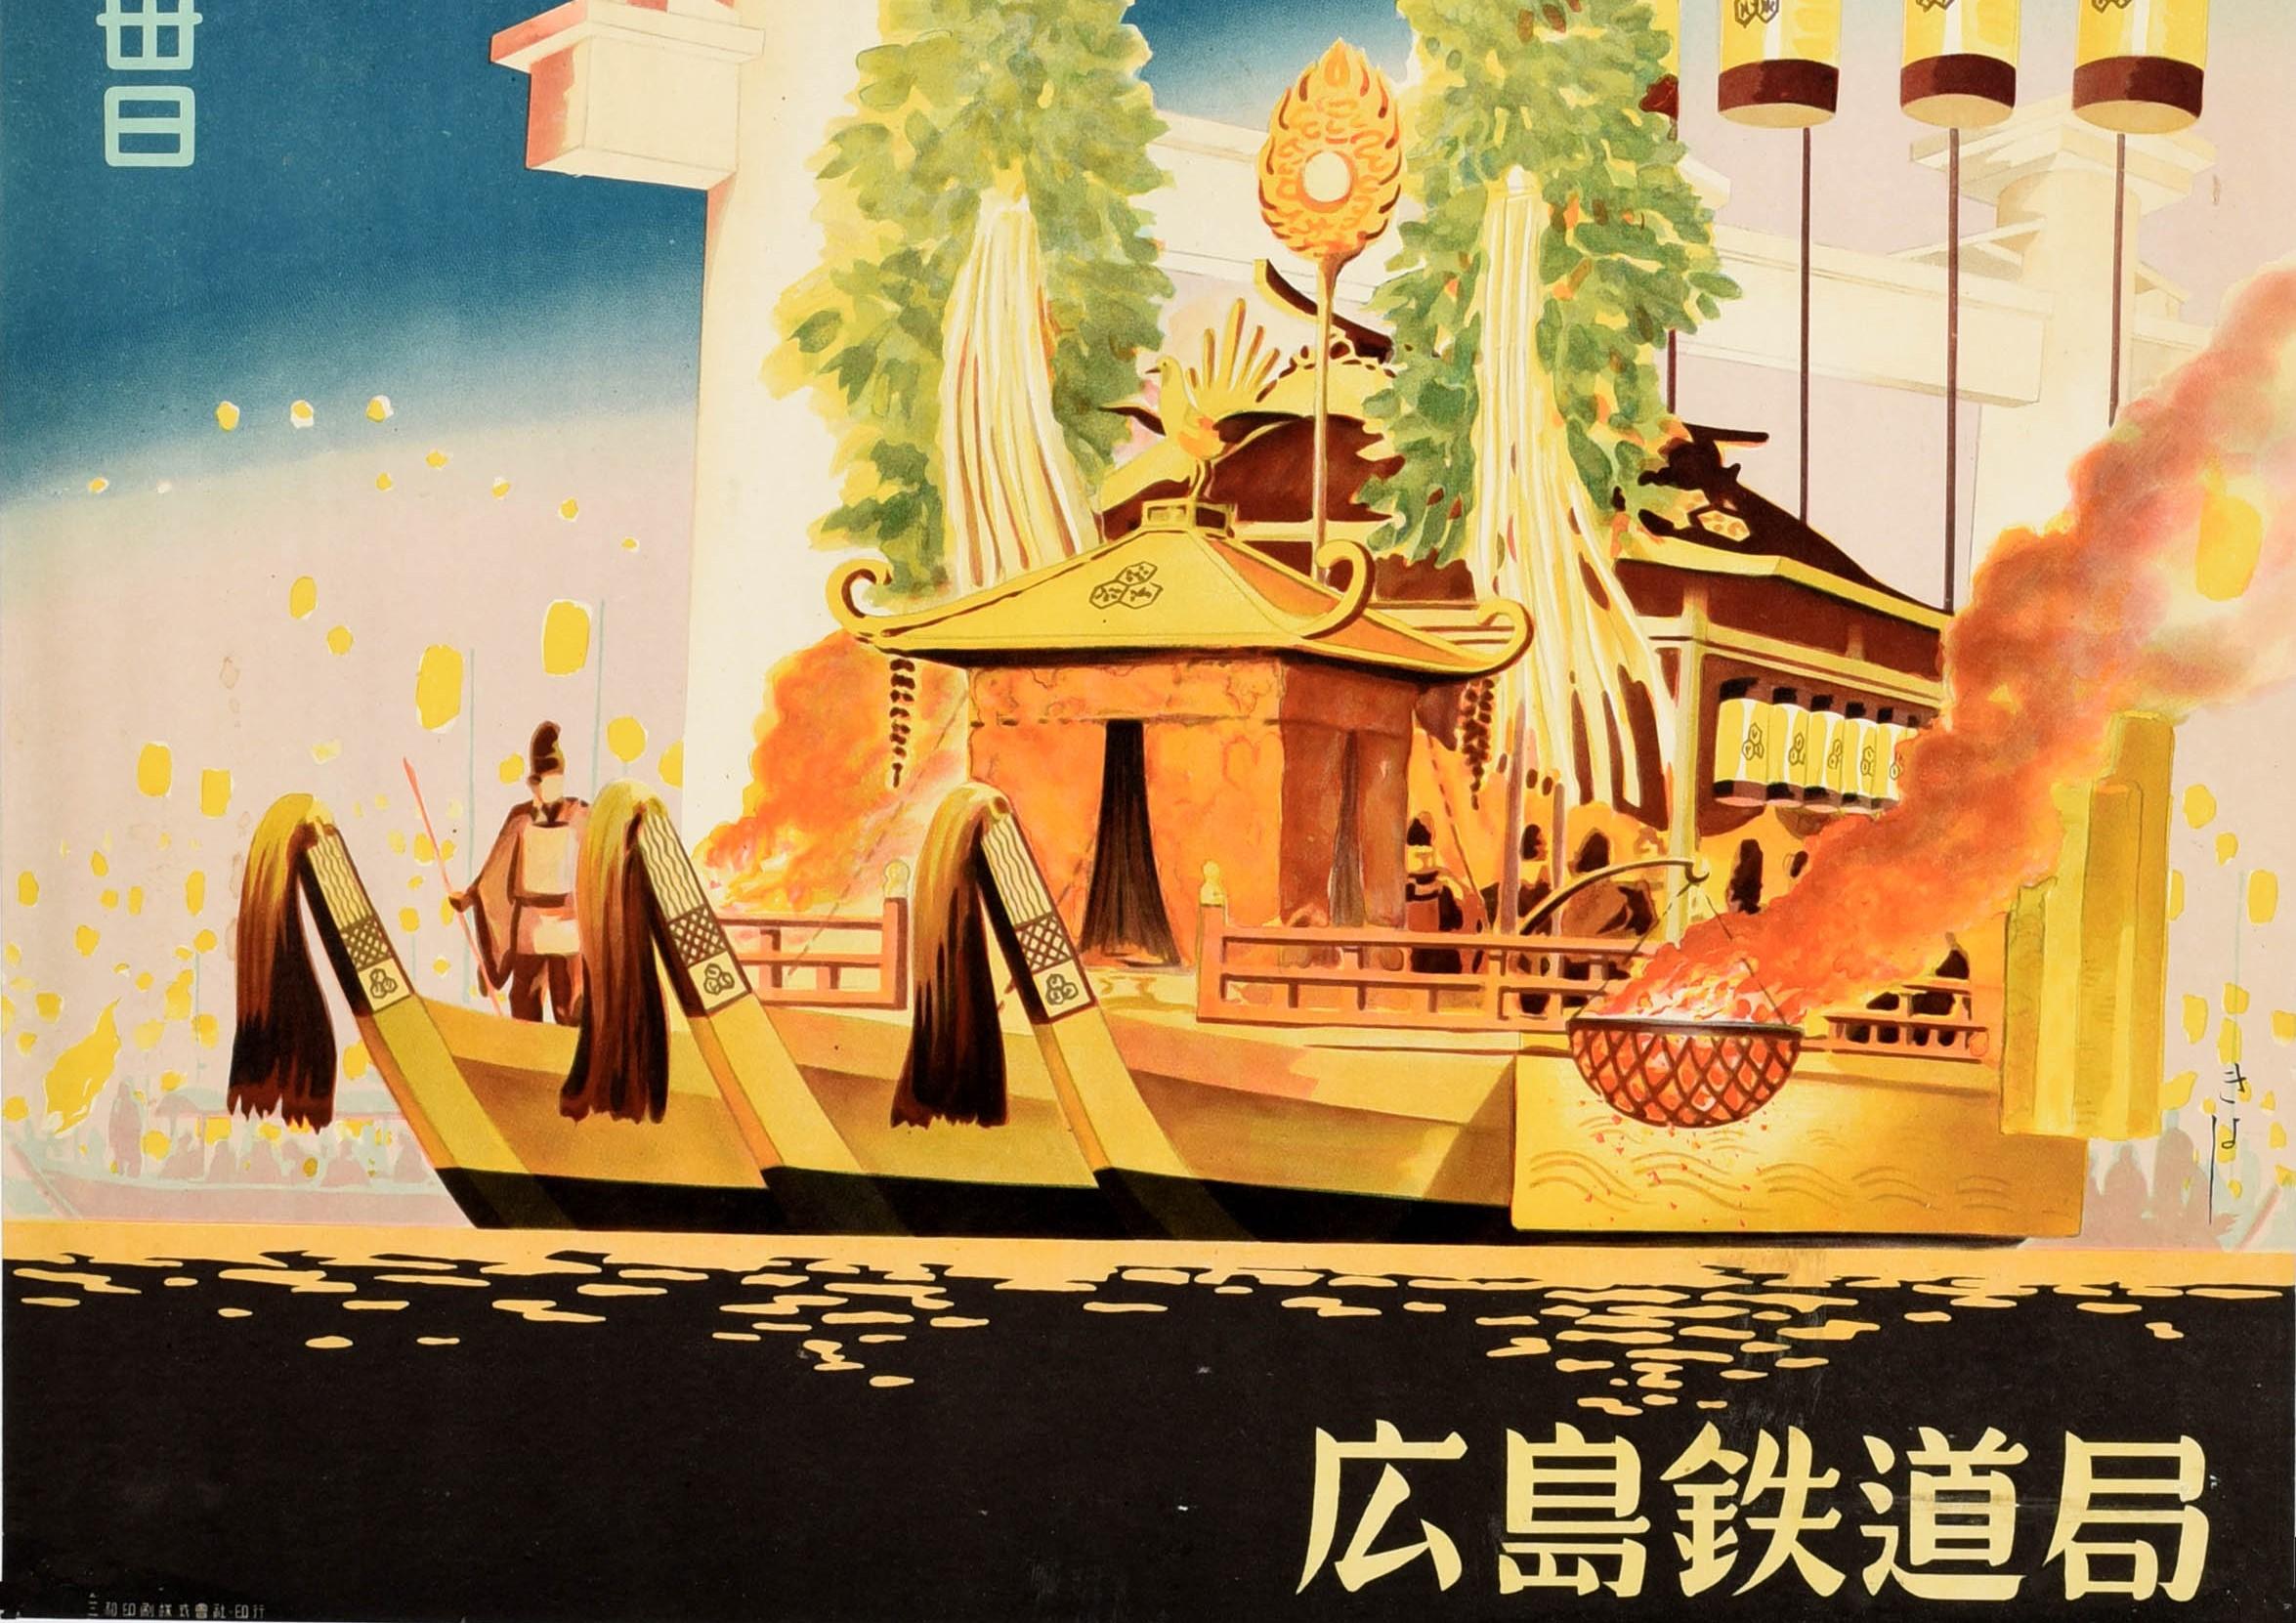 Original vintage travel poster issued by the Hiroshima Railway Bureau for a festival at the historic Shinto Itsukushima Shrine on Itsukushima island in Japan featuring fireworks and lanterns with the famous sacred torii gate that appears to float on